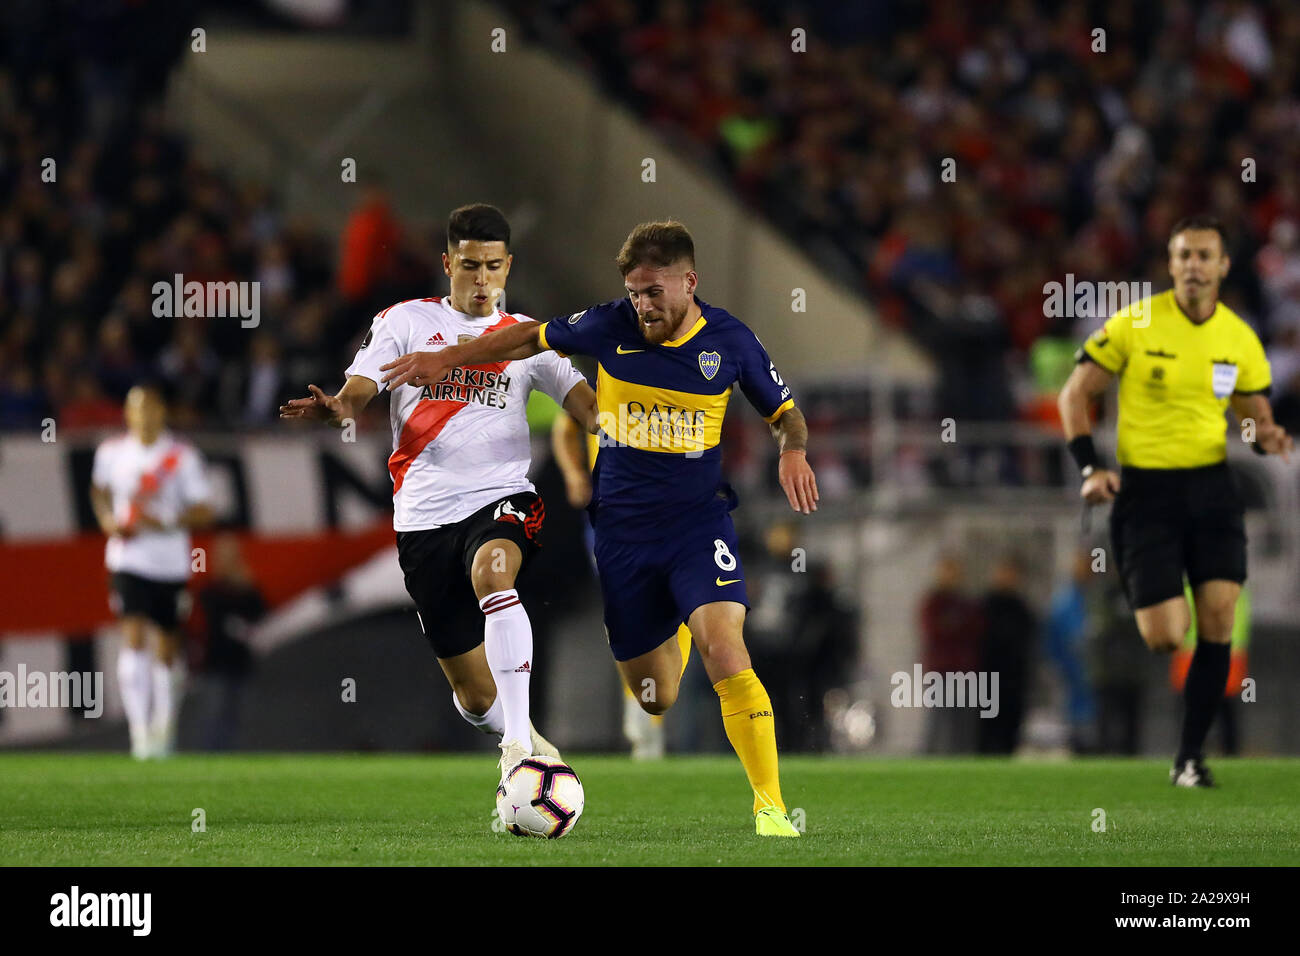 Buenos Aires, Argentina - Octobet 01, 2019: Alexis Macallister (Boca) trying to outrun then River Plate defense in Buenos Aires, Argentina Stock Photo